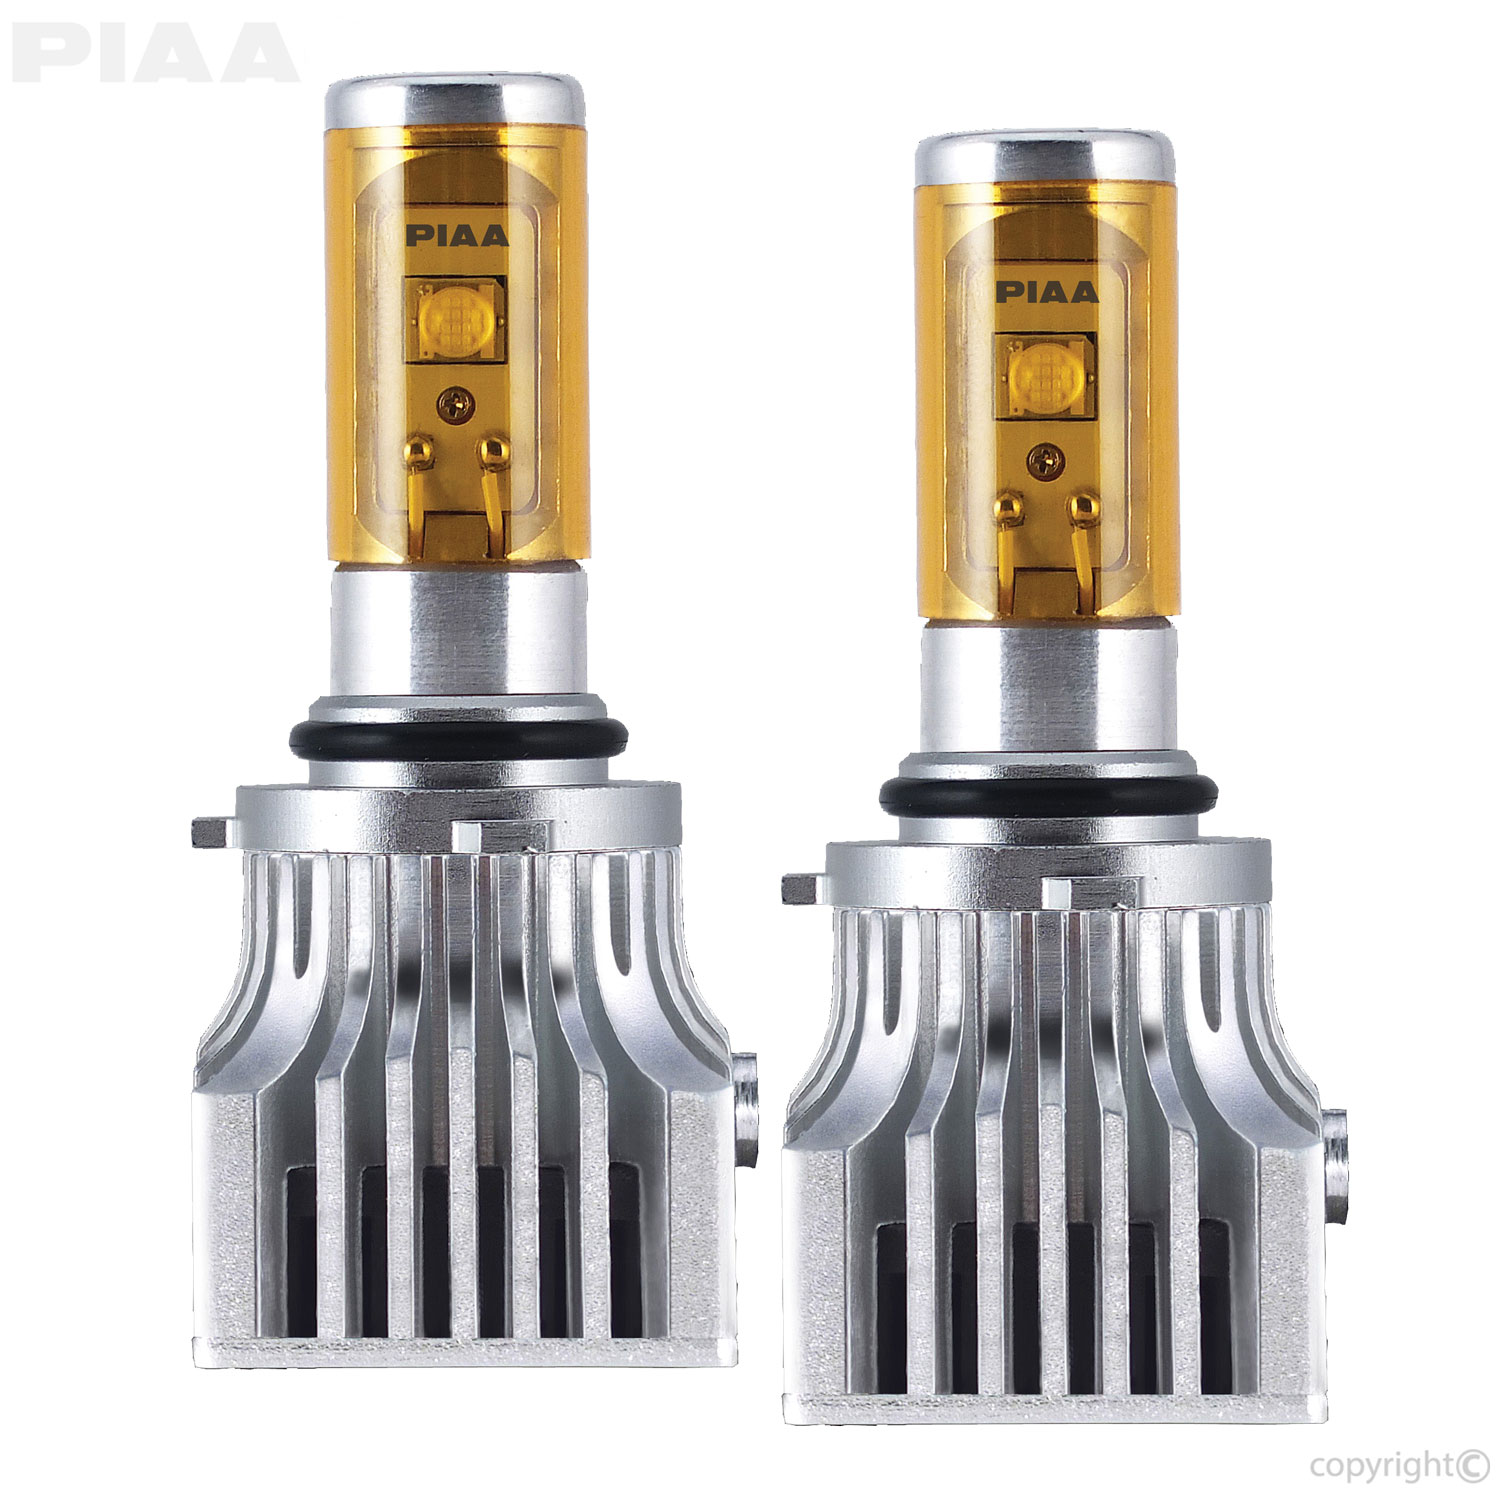 PIAA  9006 (HB4) Performance LED Bulb Ion Yellow 2800k Twin Pack #17501 -  9006